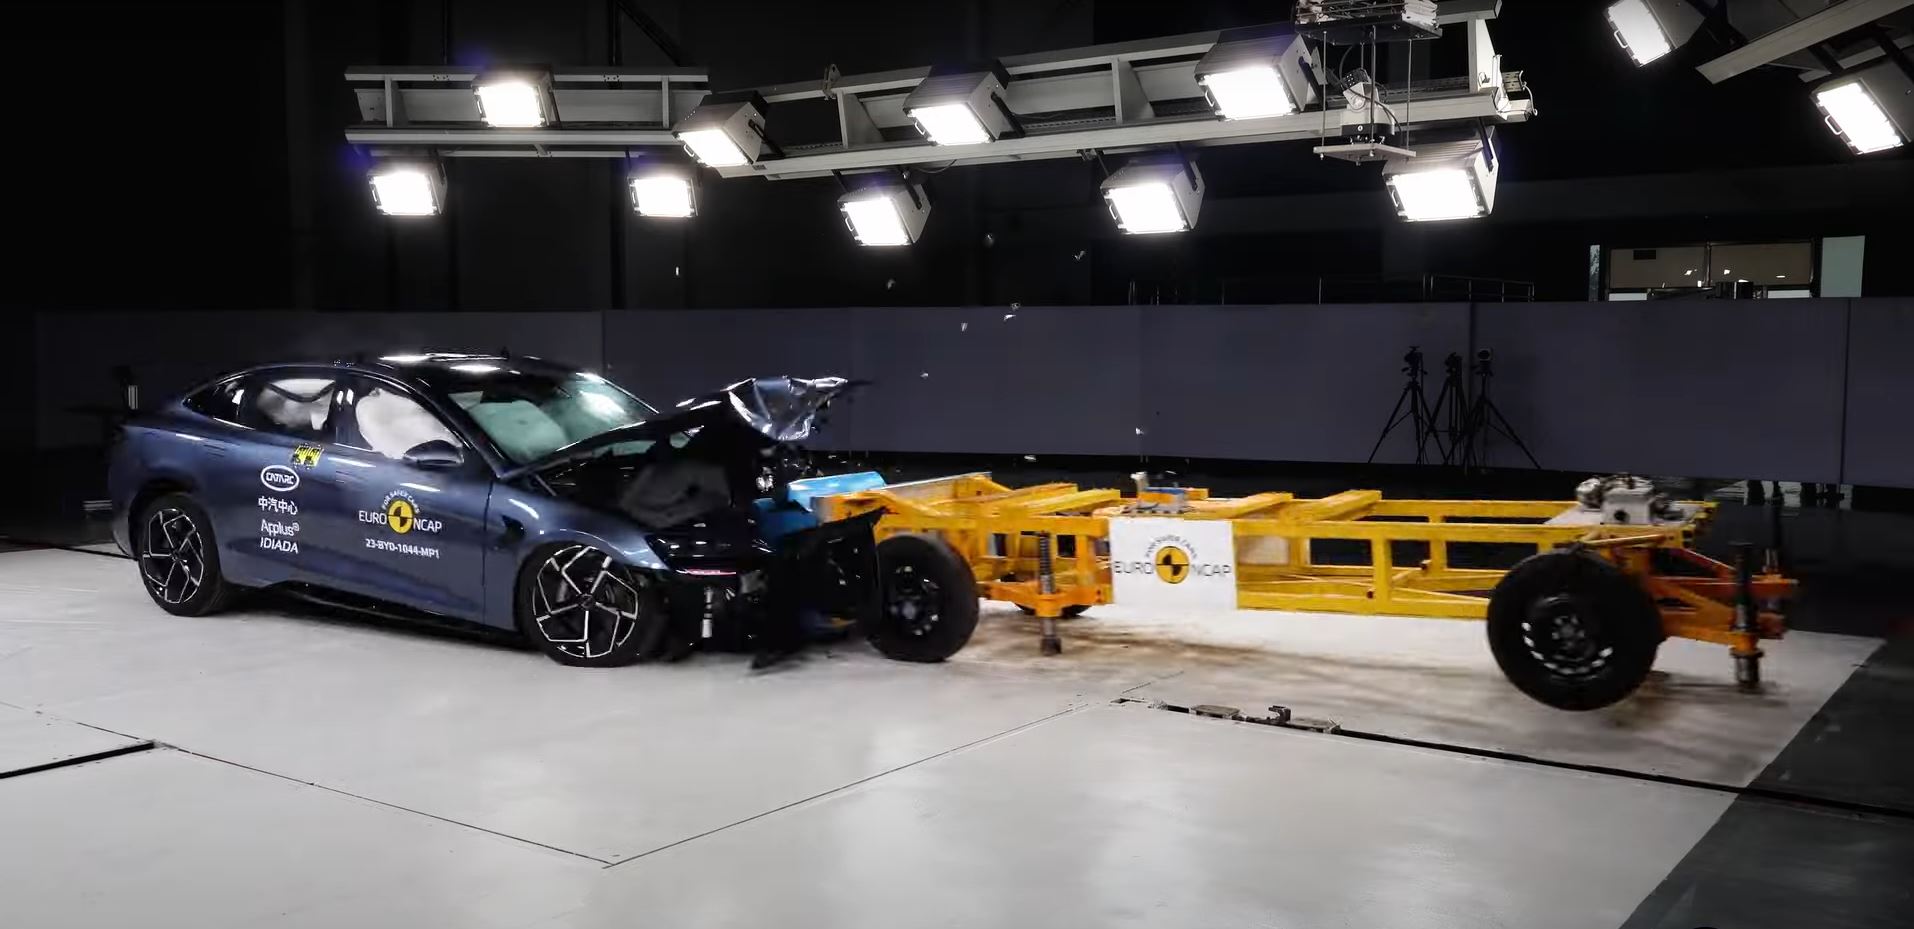 New Tesla Model S gets 5-Star Safety Rating from the Euro NCAP